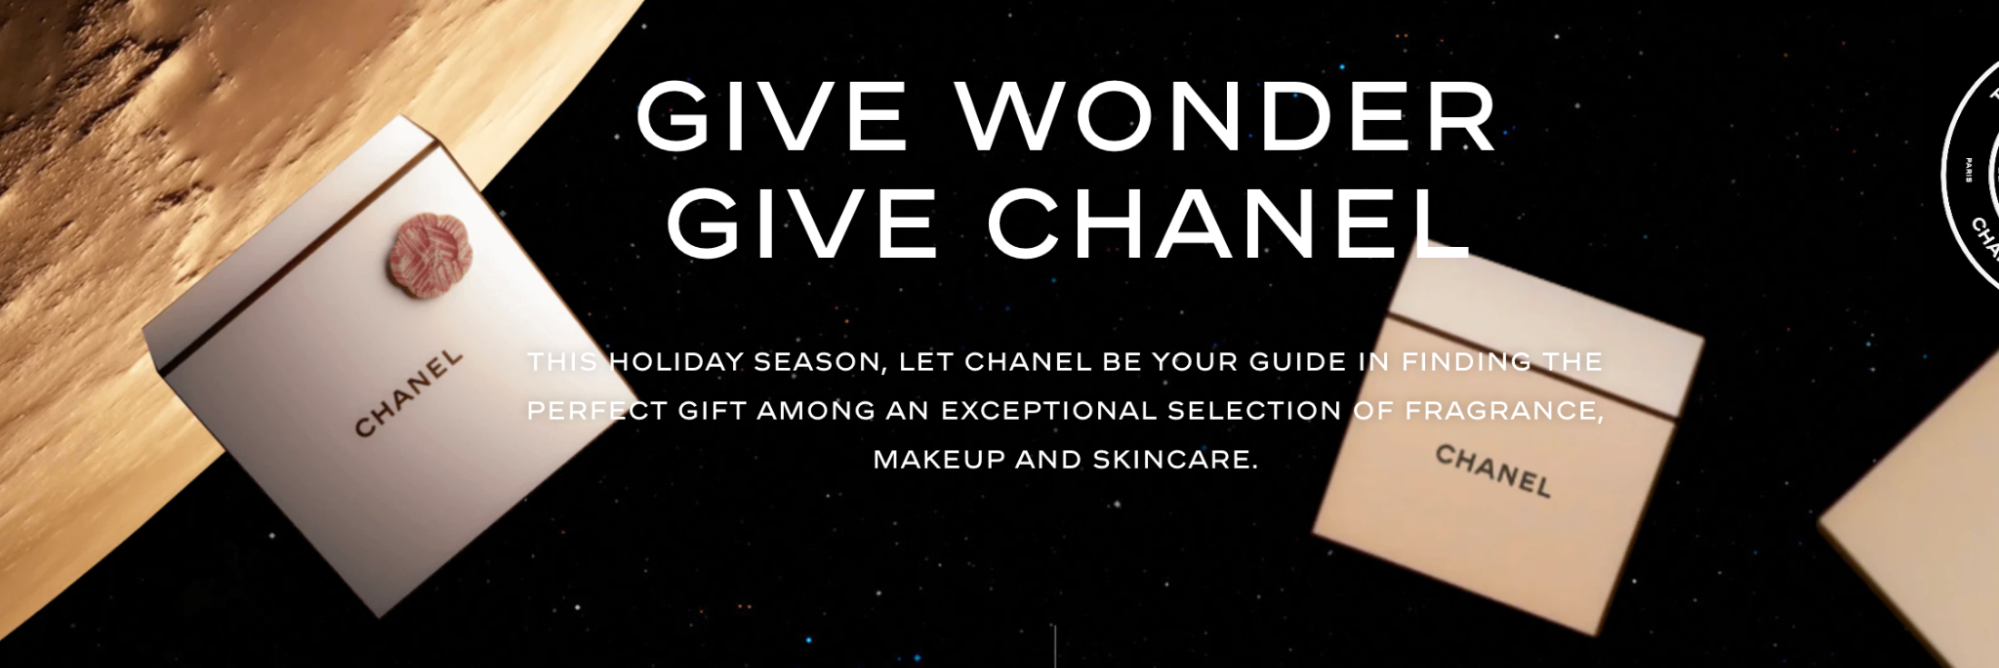 Chanel’s collection of holiday gift guides